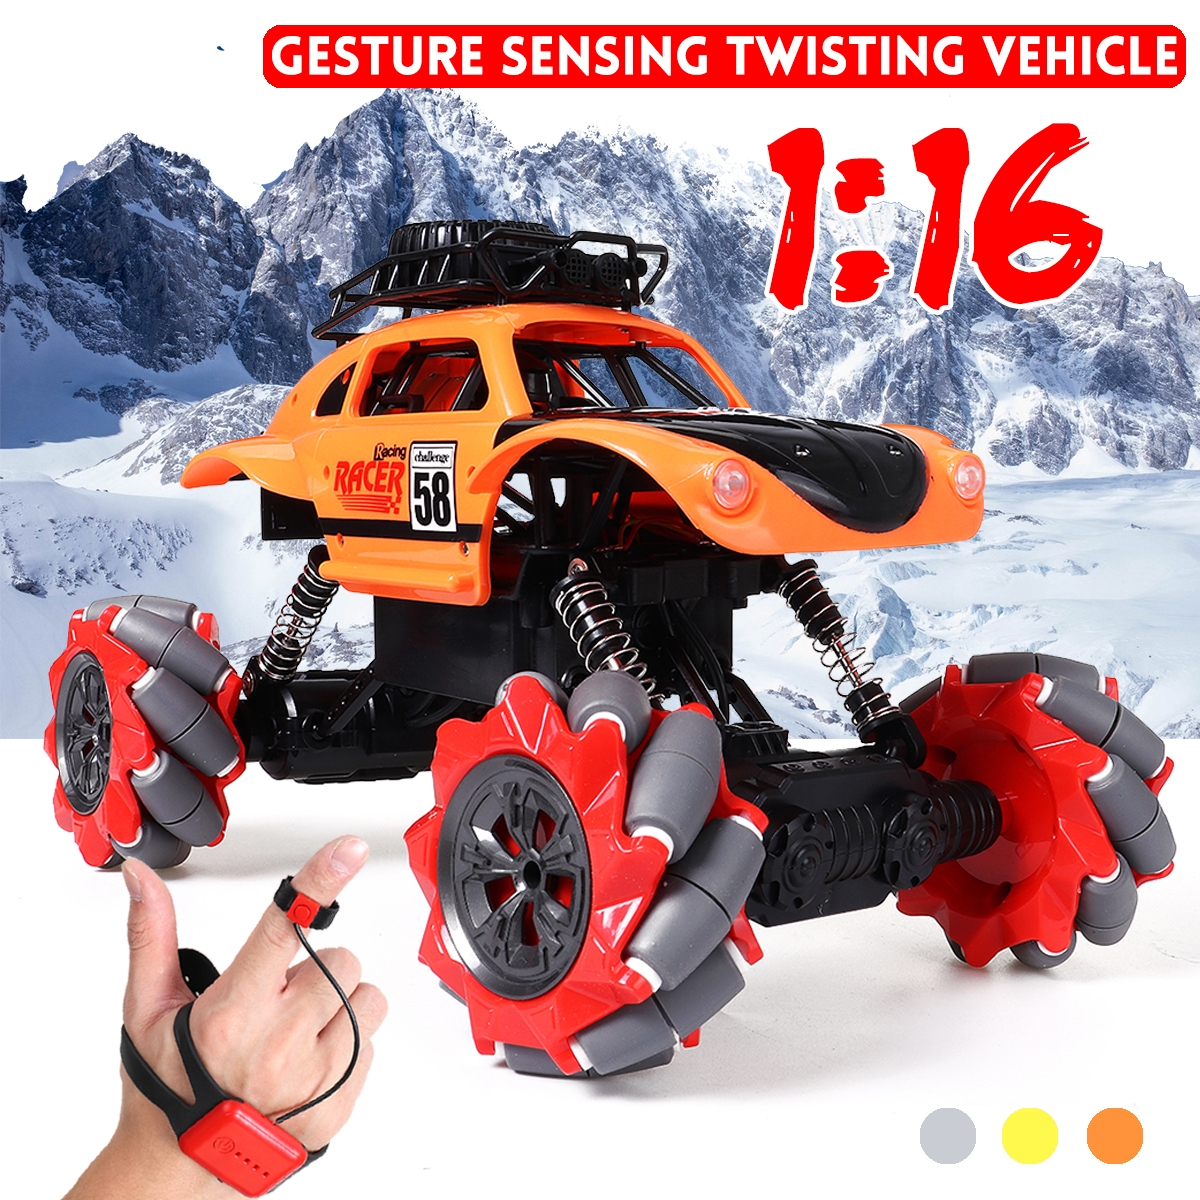 1/16 2.4G Watch Control Gesture Induction Electric RC Drift Car Toys With Light